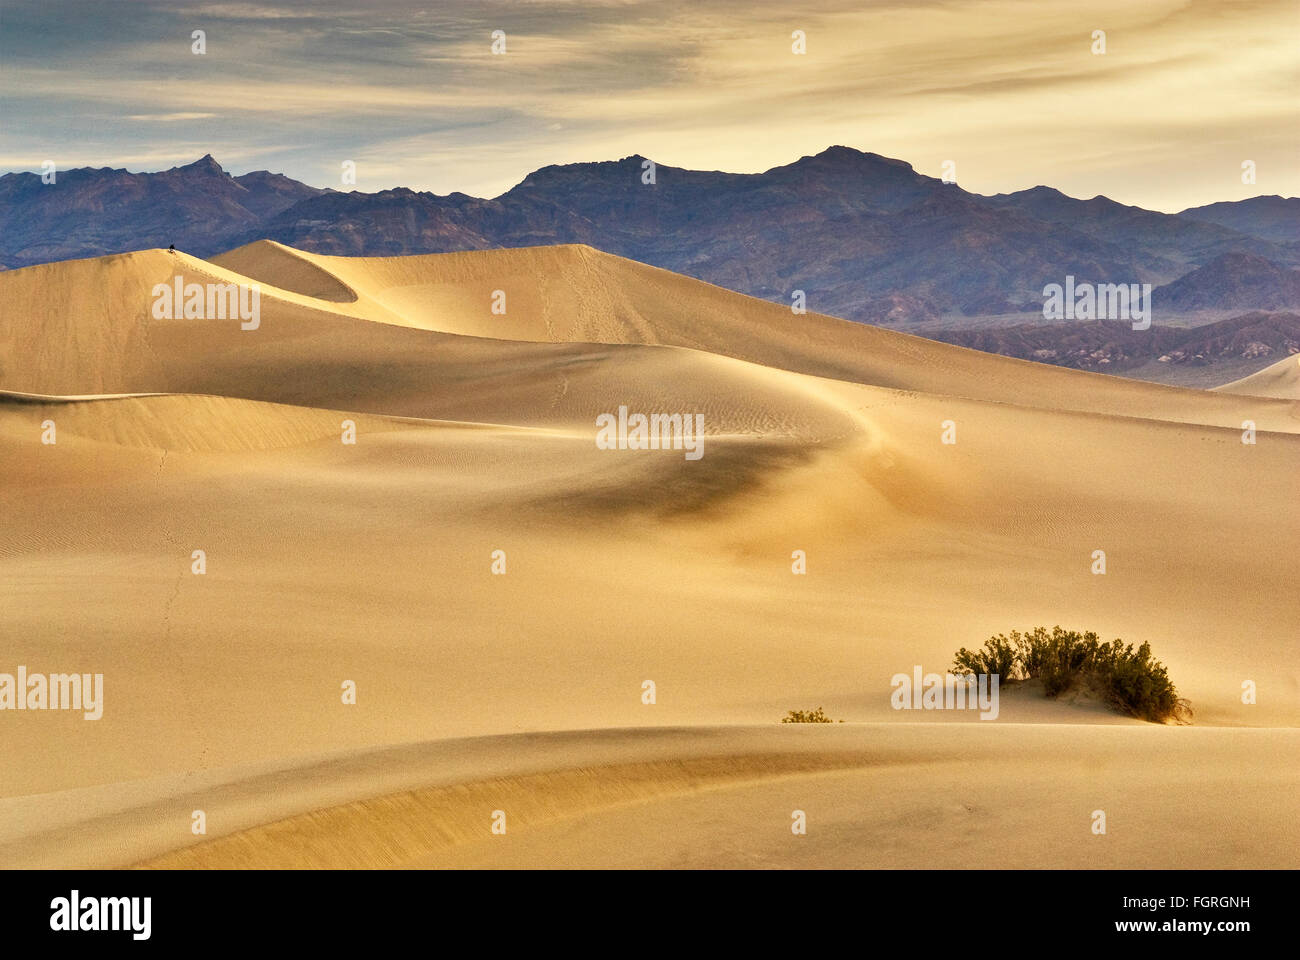 Mesquite Flat sand dunes and Amargosa Range in distance at sunrise in Death Valley National Park, California, USA Stock Photo